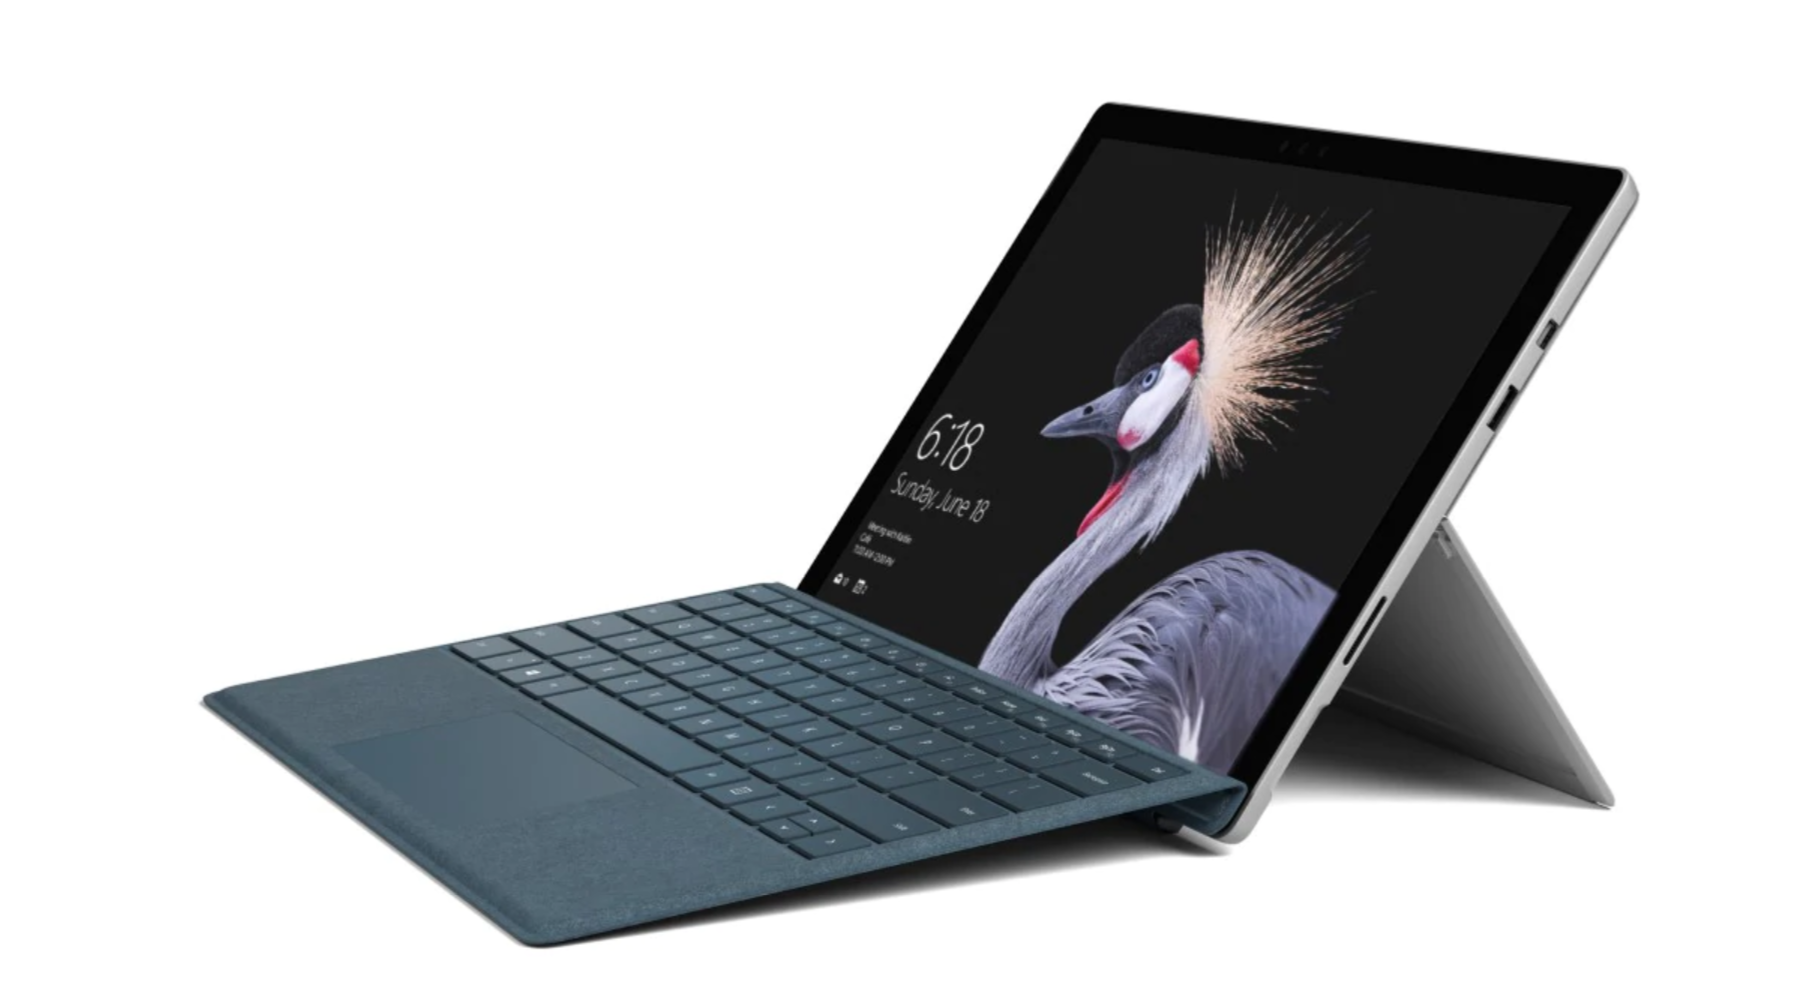 Microsoft's New Surface Devices, What Are They Missing?